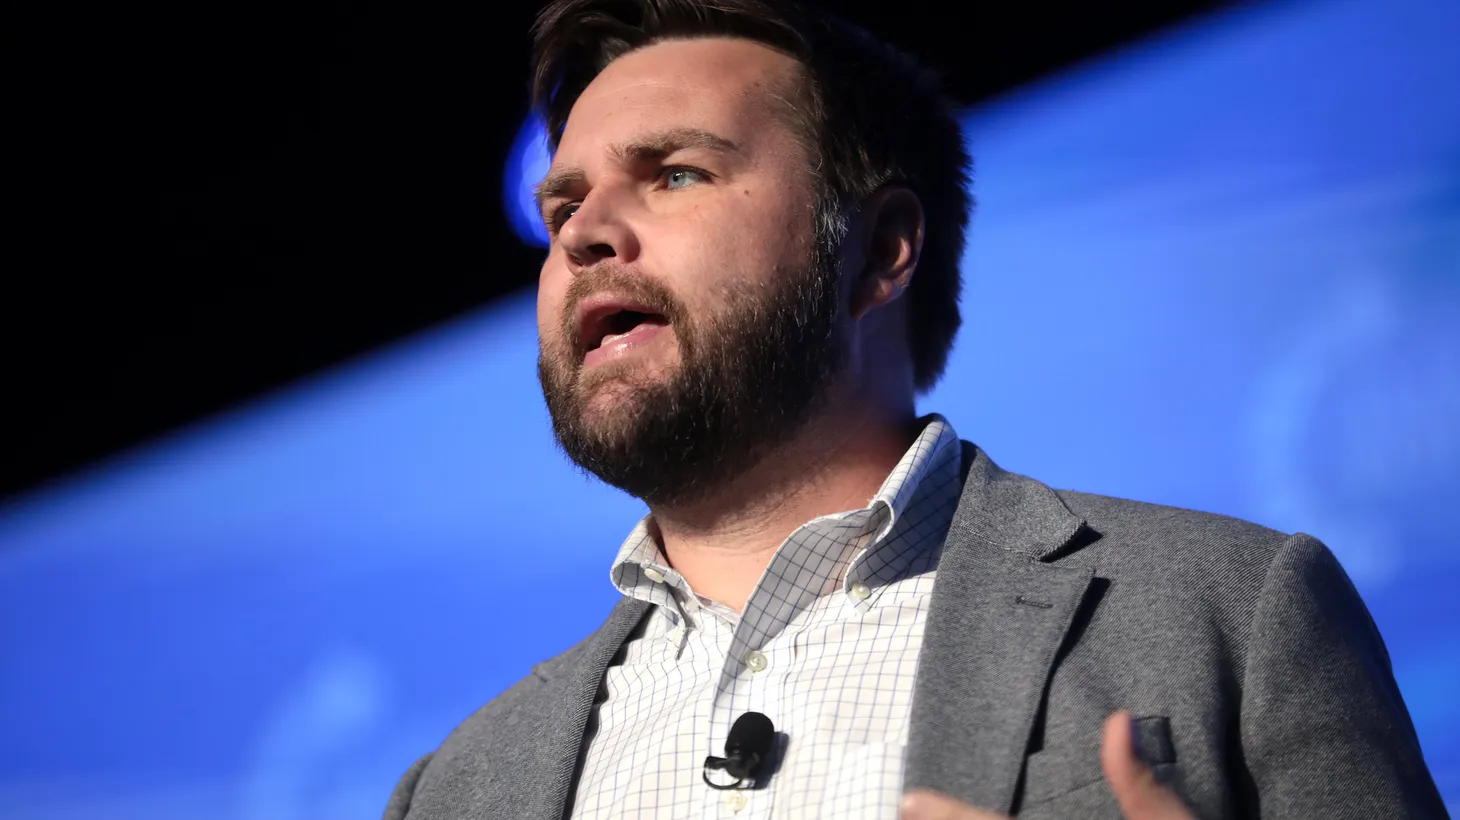 J.D. Vance speaks with attendees at the 2021 Southwest Regional Conference hosted by Turning Point USA at the Arizona Biltmore in Phoenix, Arizona.